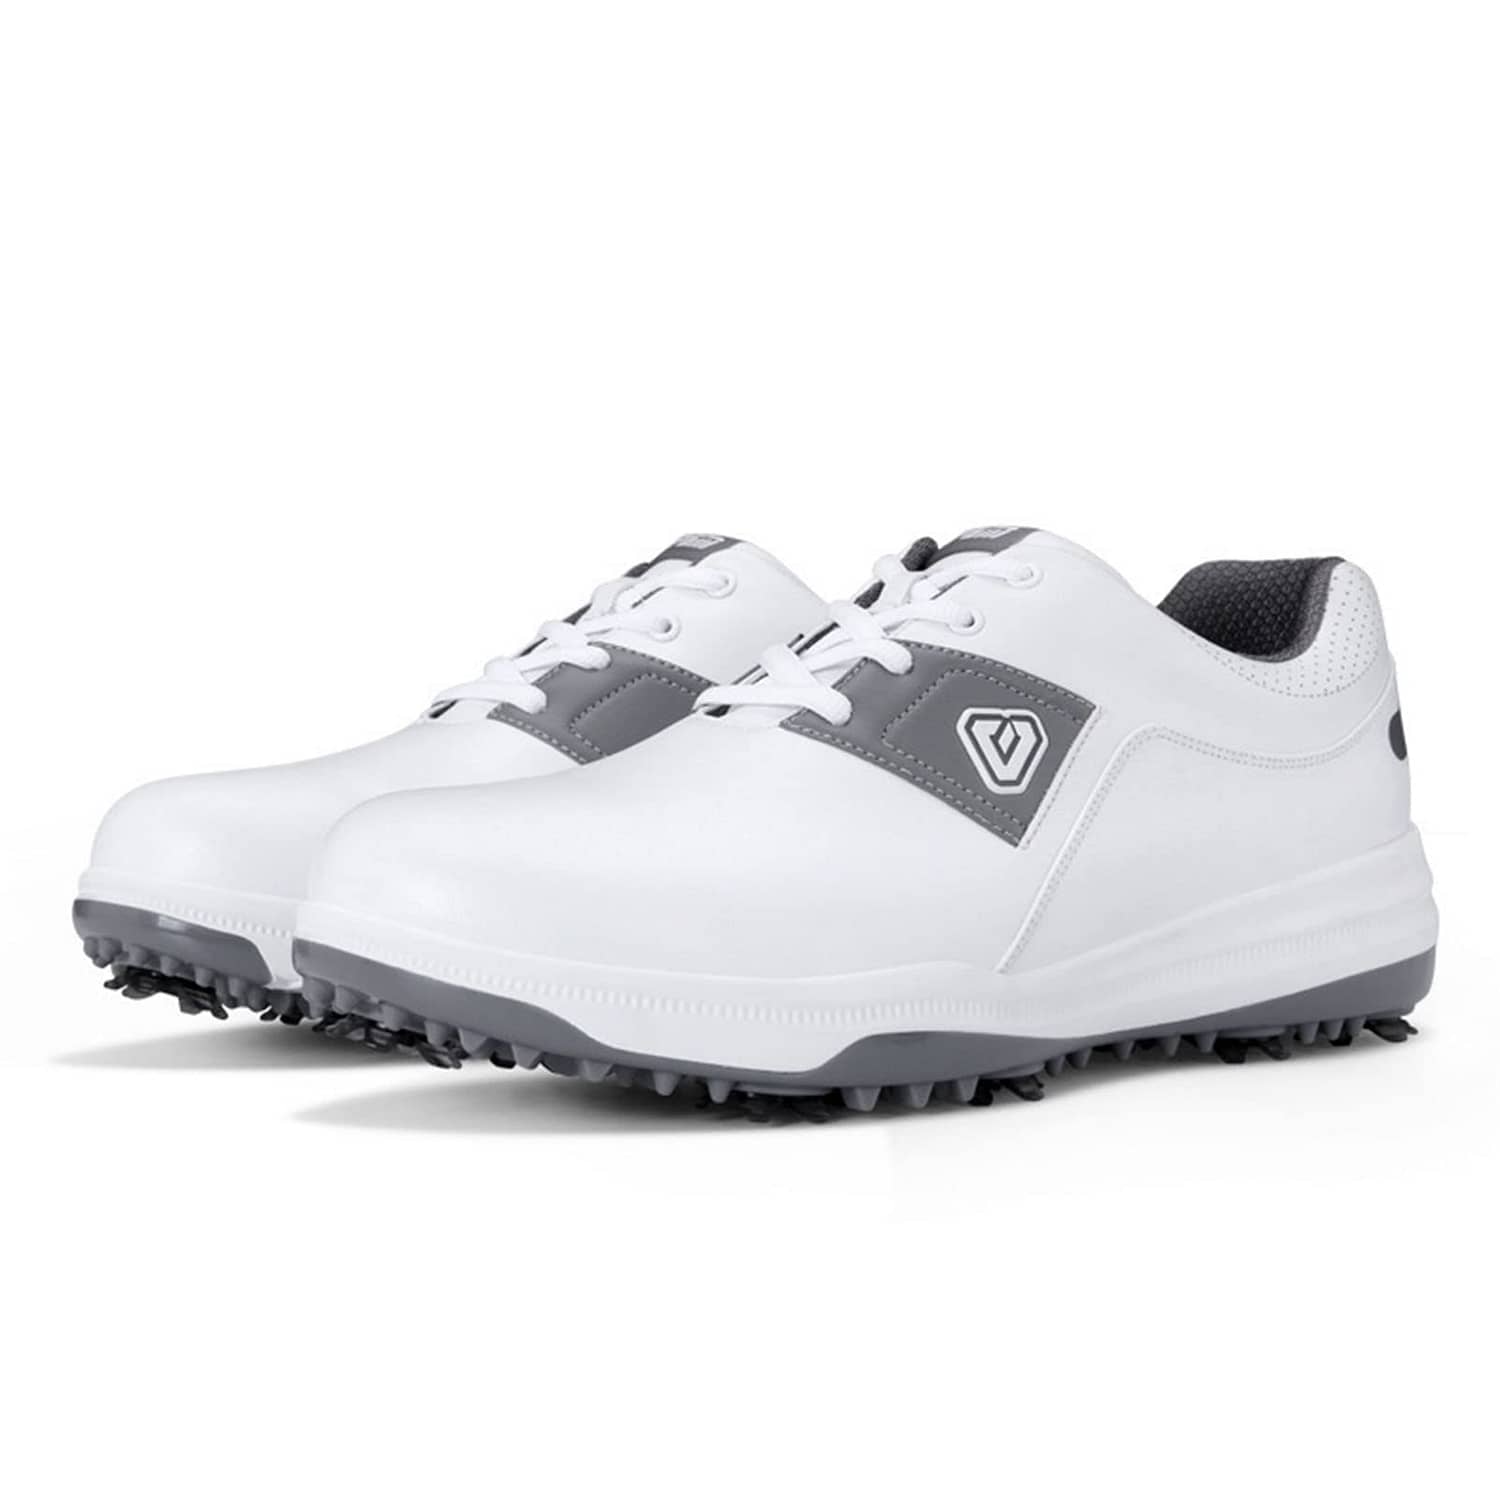 What Materials Are Used in Golf Shoes?